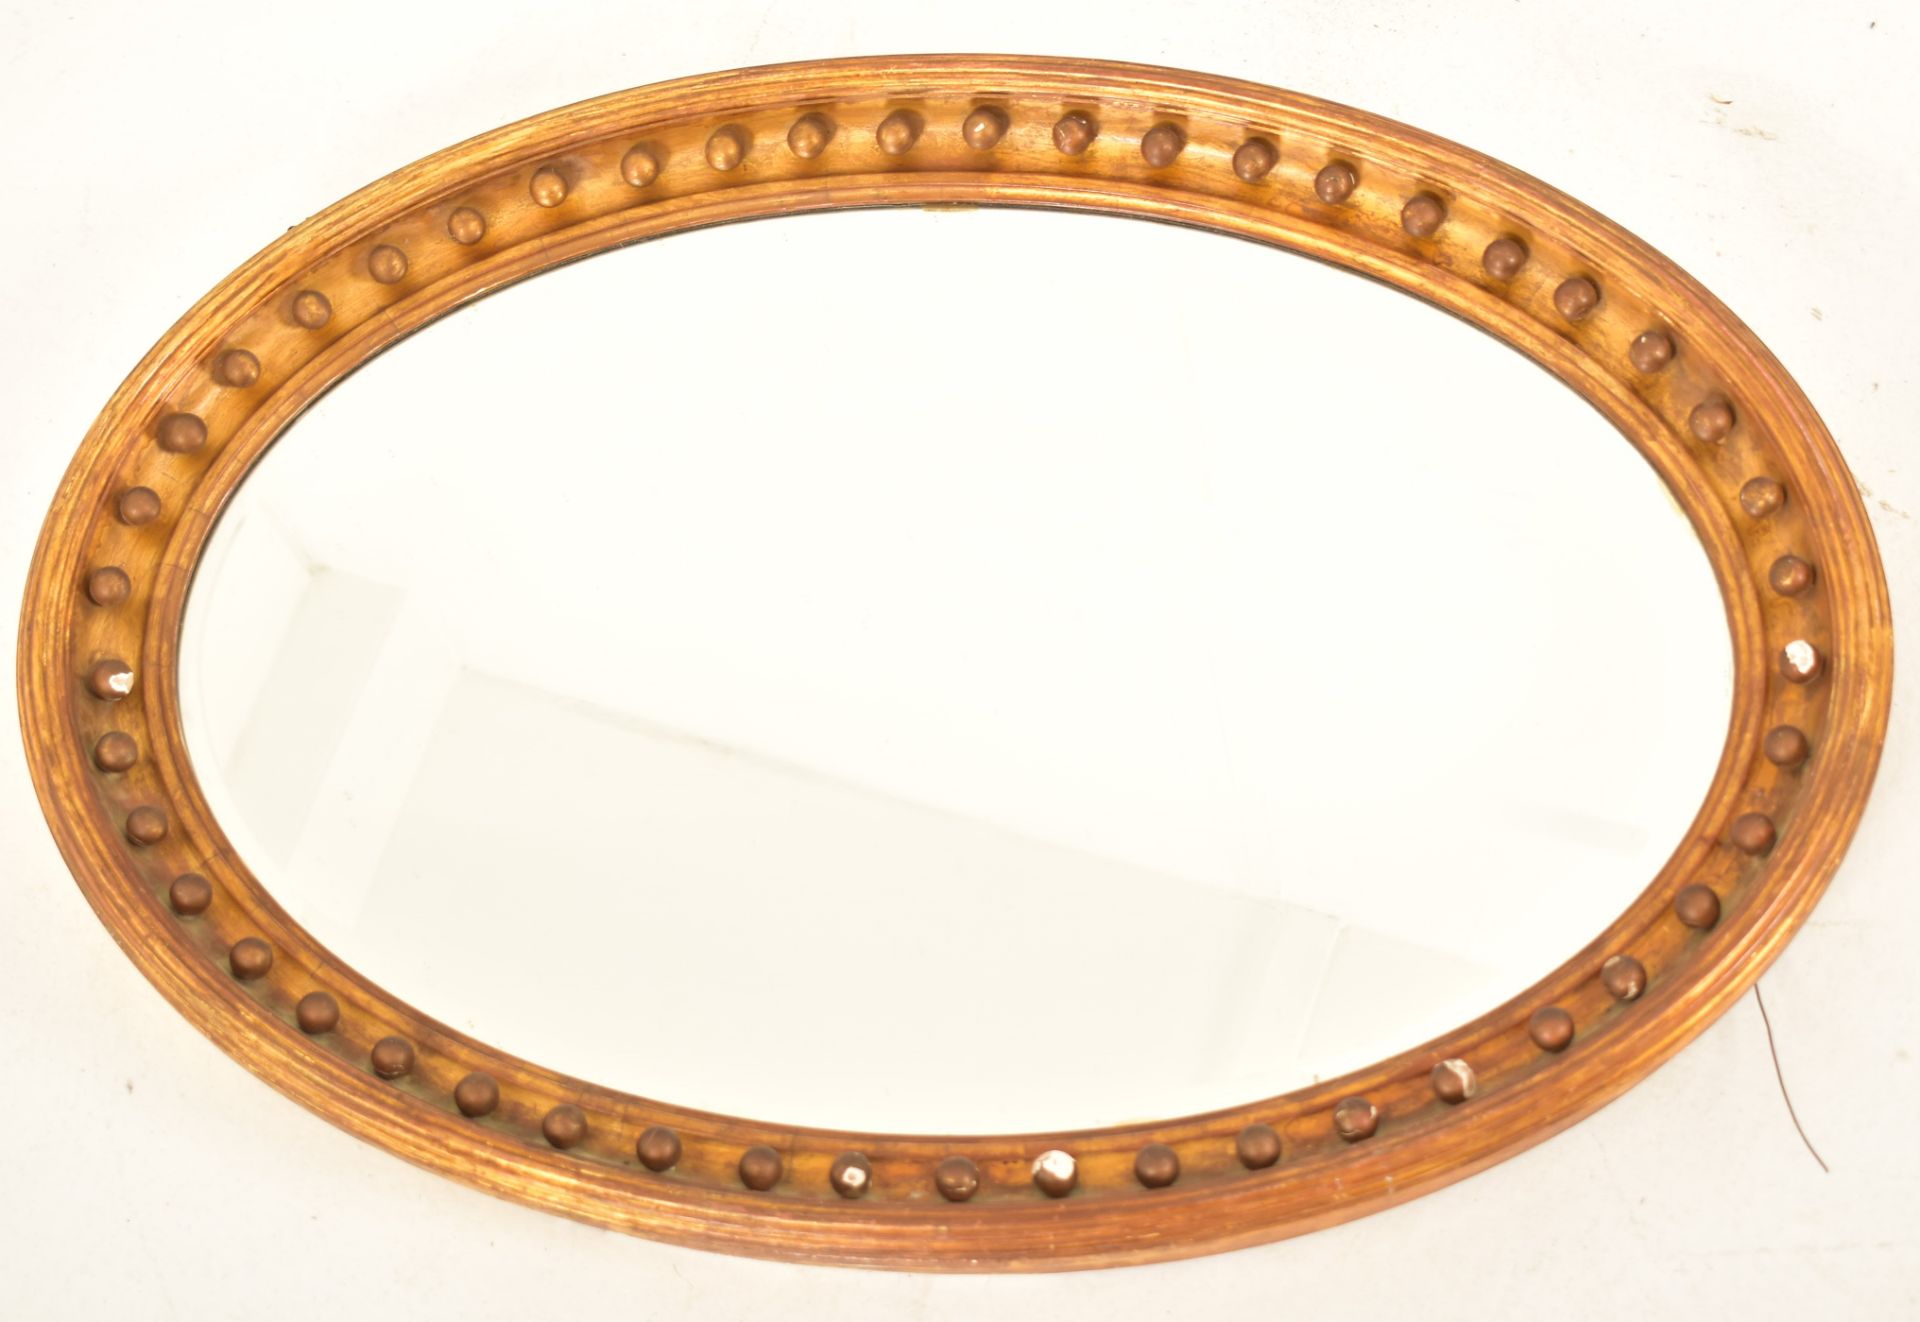 VICTORIAN 19TH CENTURY GILTWOOD OVAL MIRROR